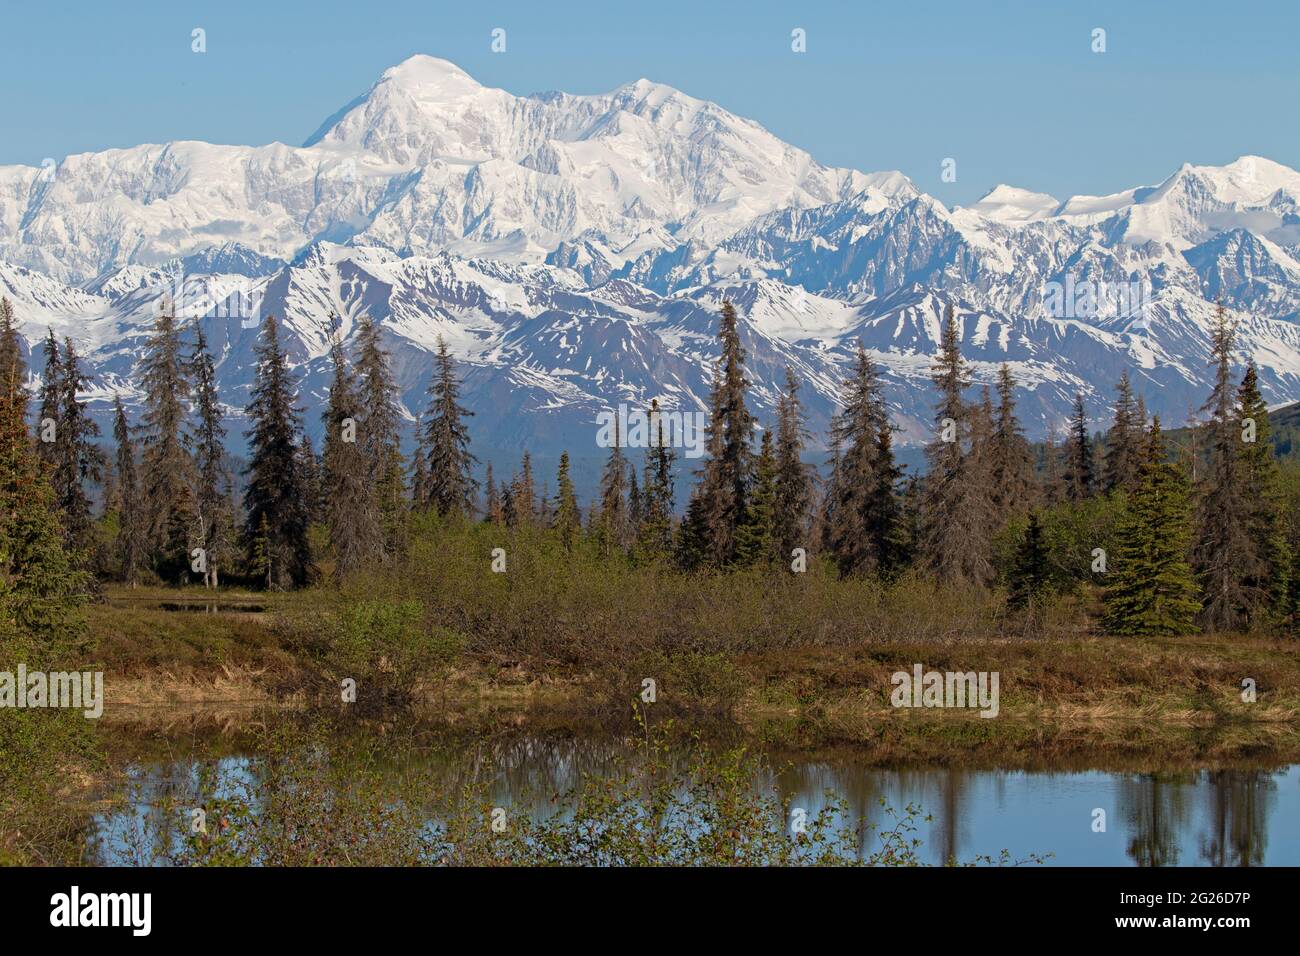 Denali, formerly Mount McKinley, rises 20,310 feet over the upper Susitna Valley. The mountain is seen here on a clear day in early June. Stock Photo